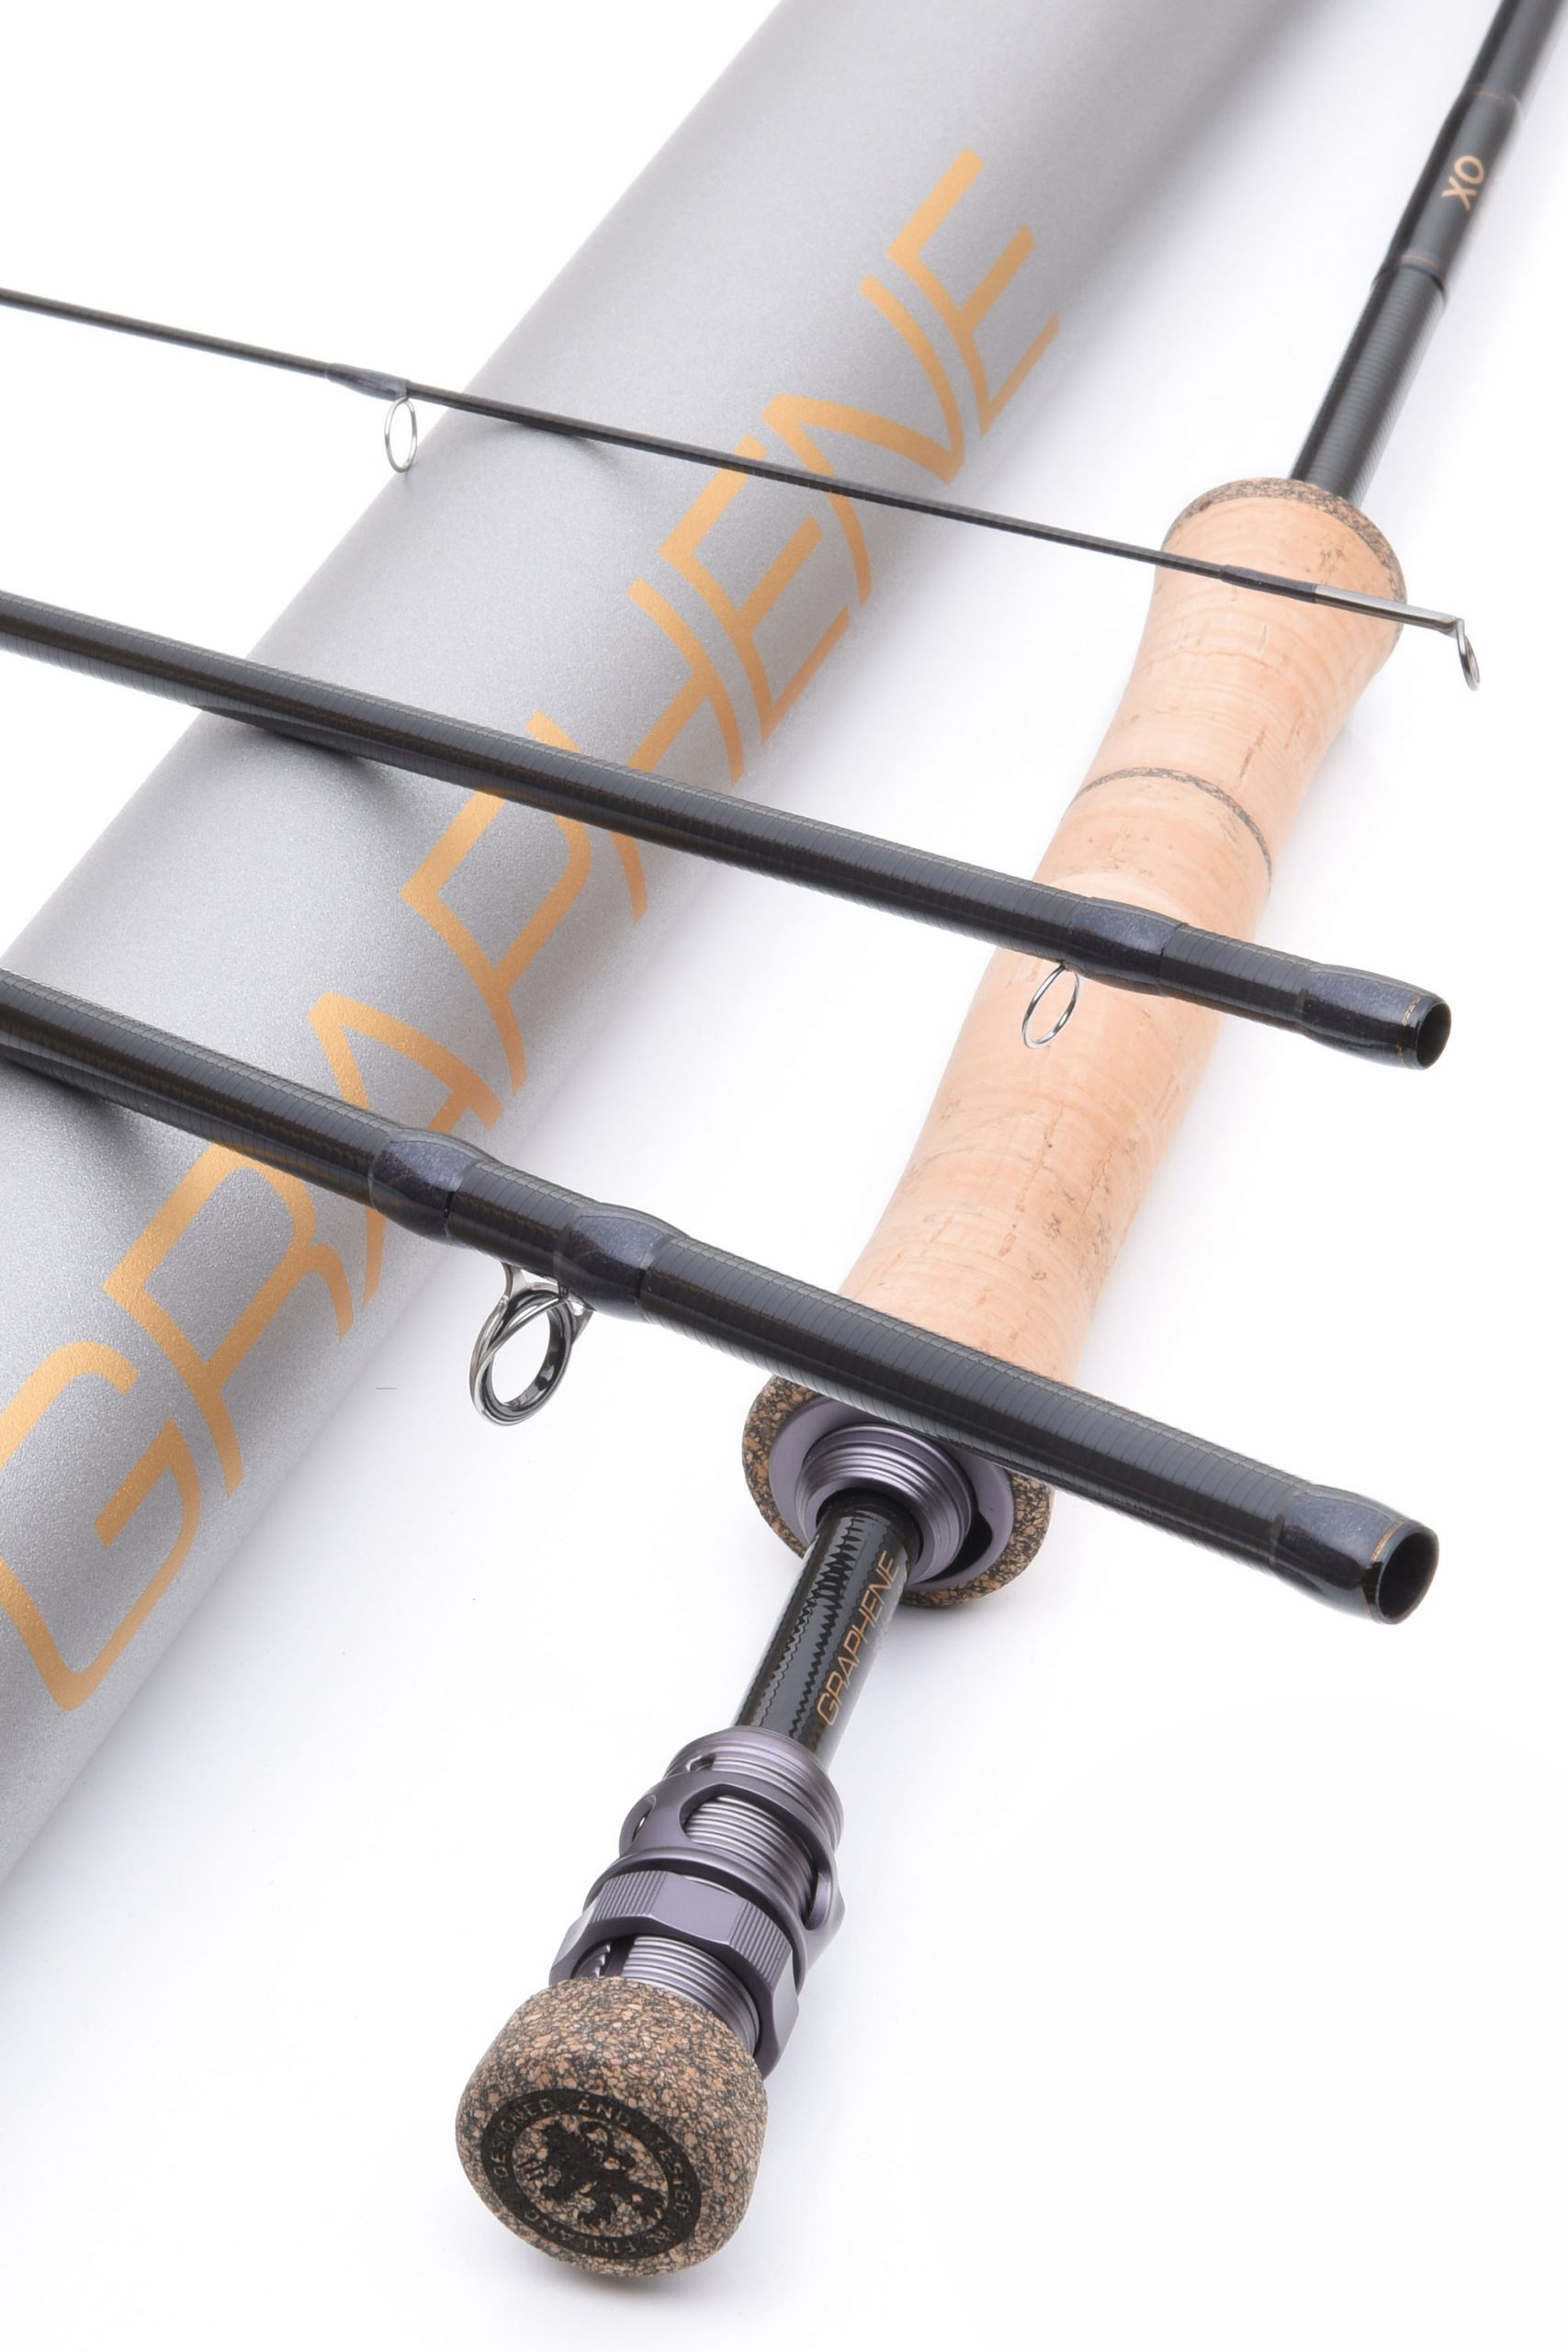 Vision Xo Graphene Fly Rod 9 Foot #5 For Fly Fishing